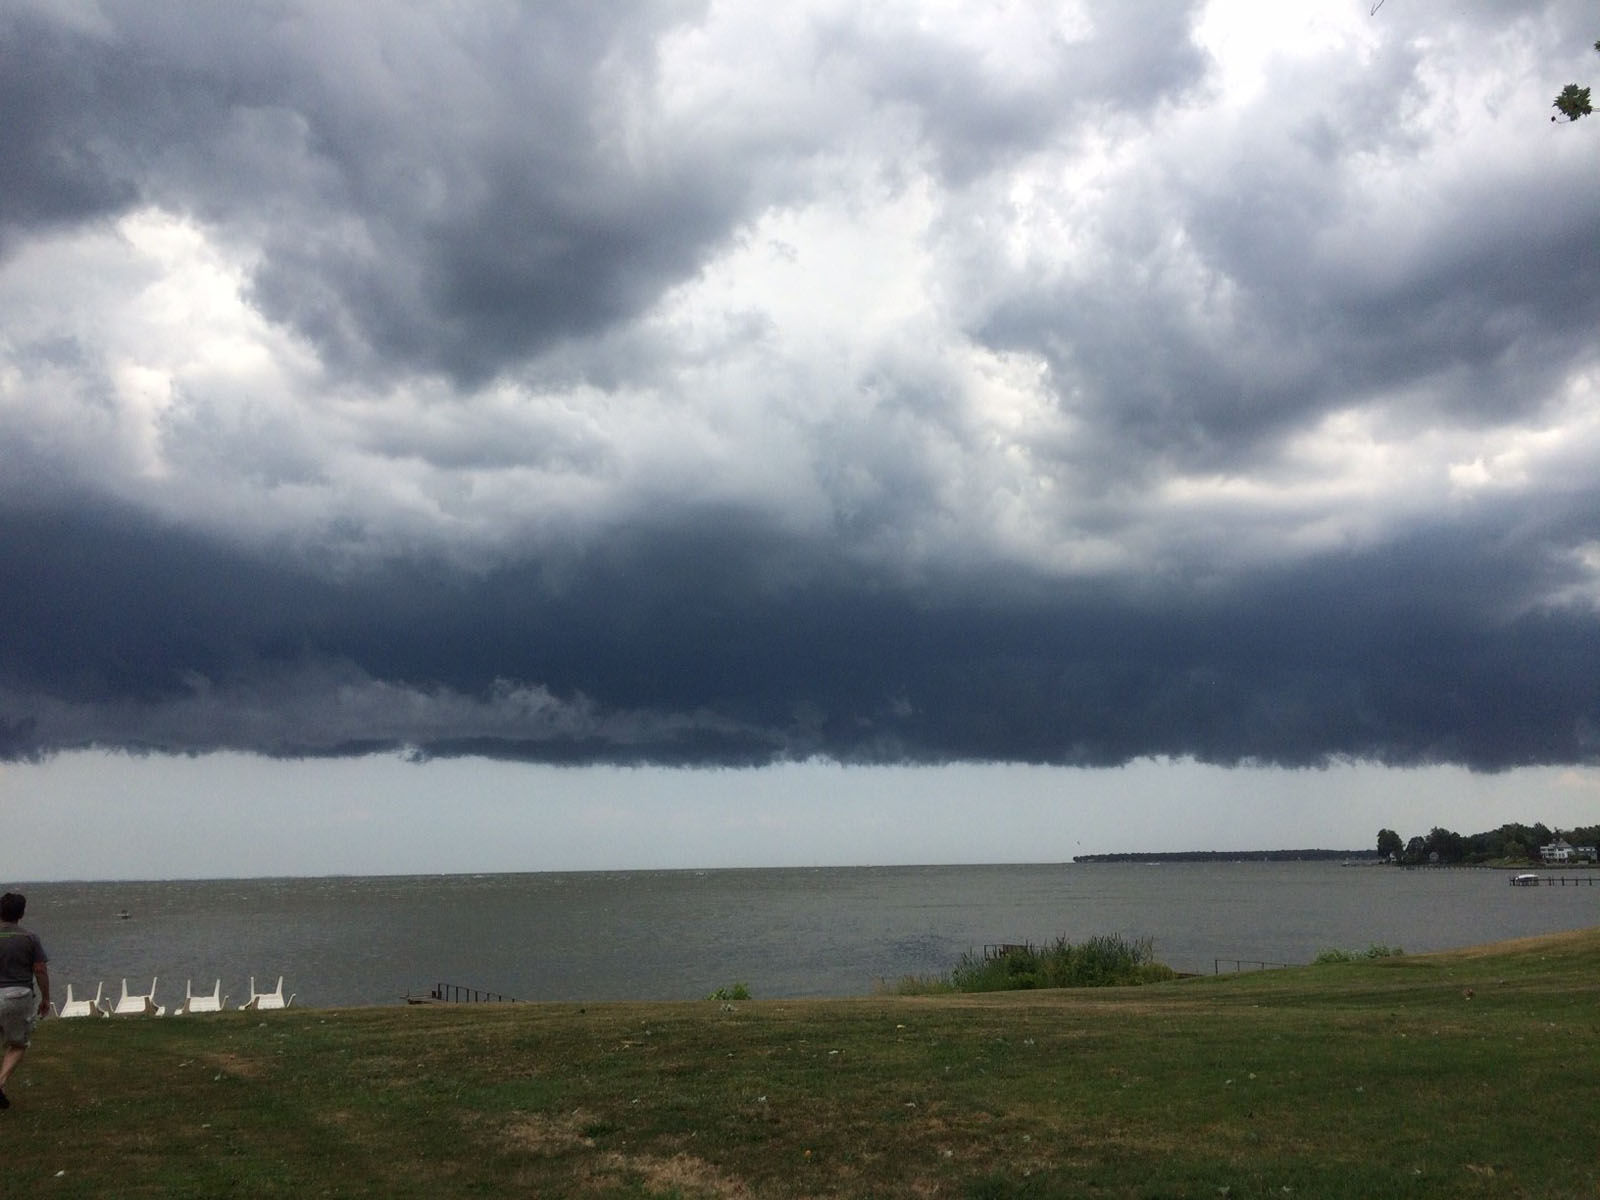 Storm over the Chesapeake Bay in Deale, Maryland. (Courtesy The Days)